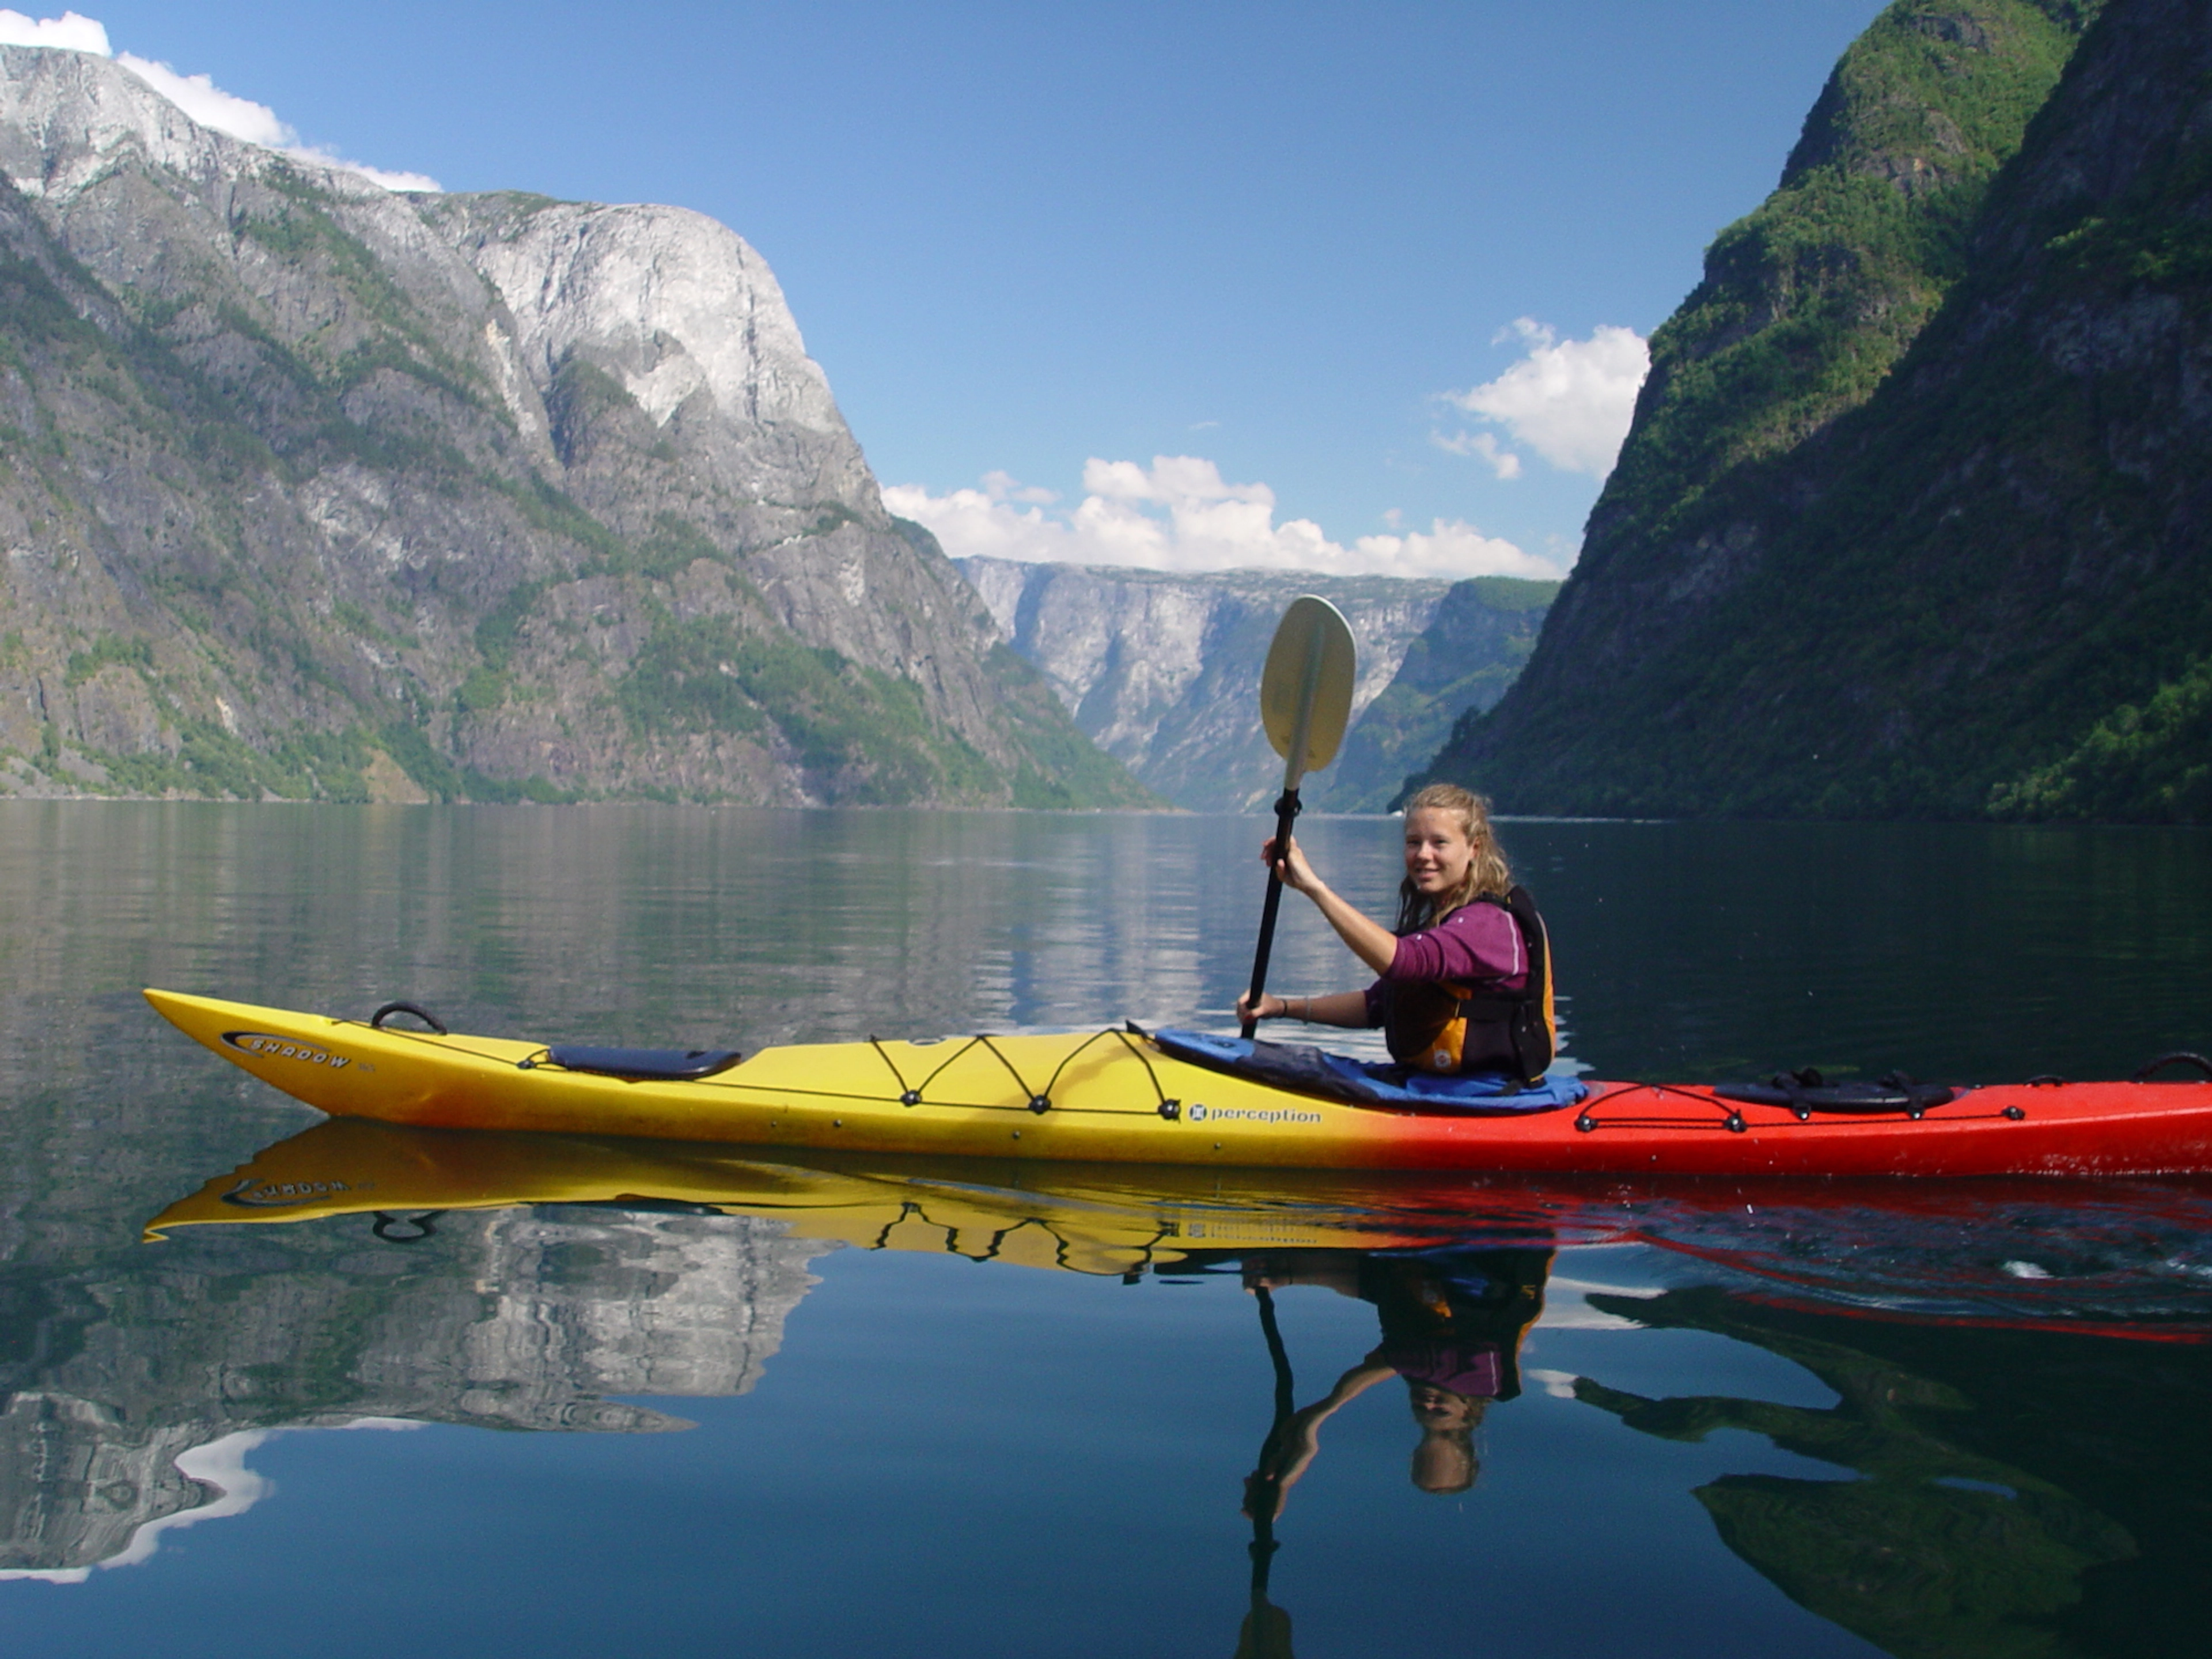 Full-day trip with kayak on the Nærøyfjord - Things to do in Gudvangen, Norway